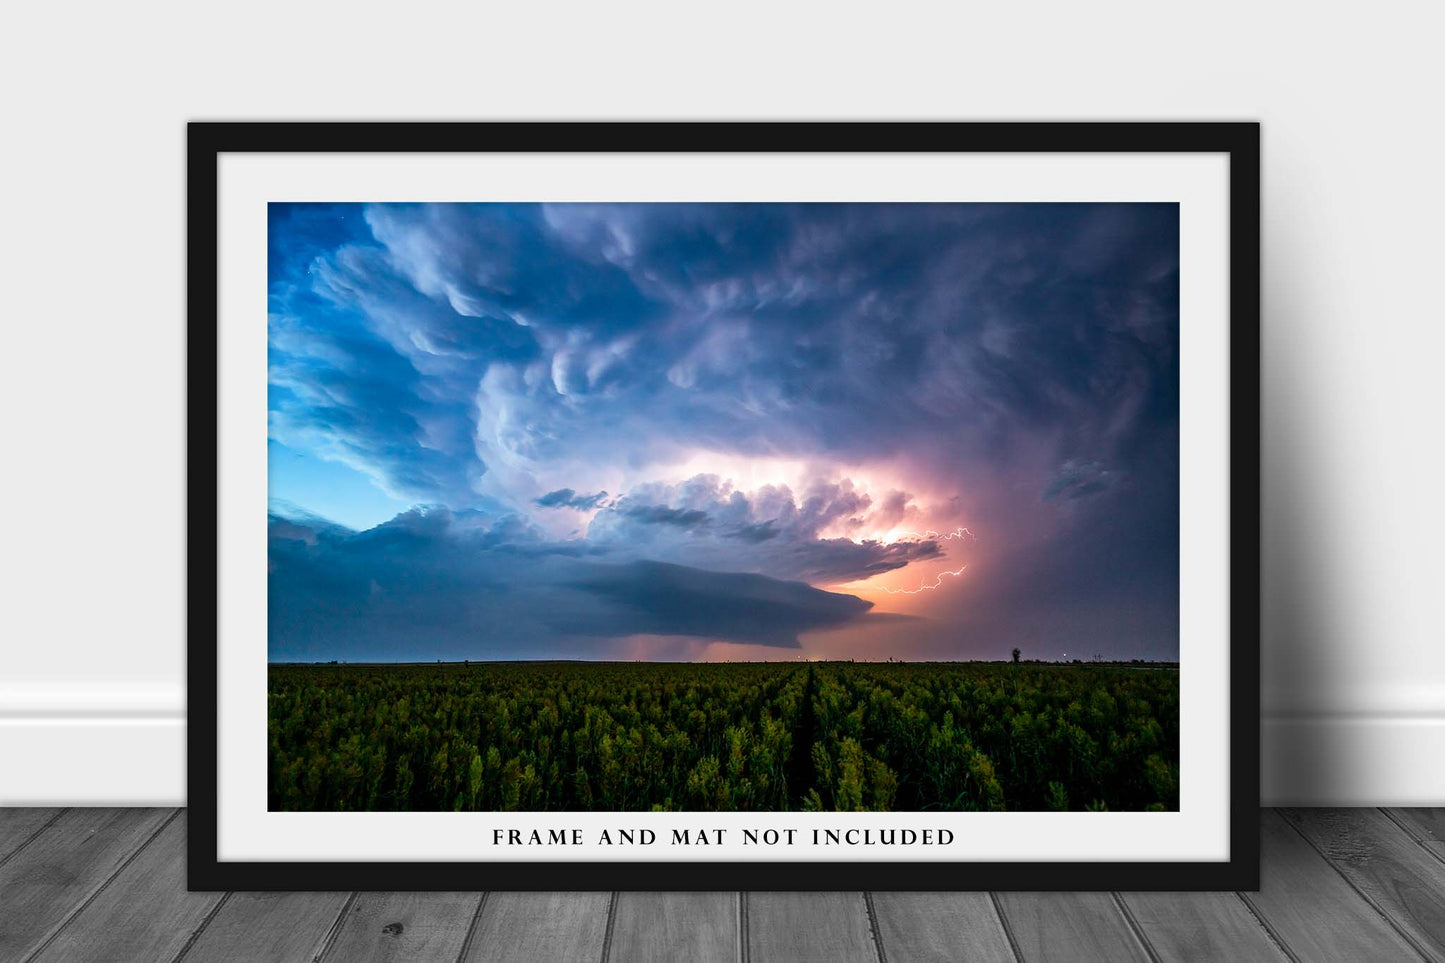 Thunderstorm Photography Print - Picture of Storm Cloud Illuminated by Lightning Over Field at Night in Nebraska Scenic Wall Art Photo Decor